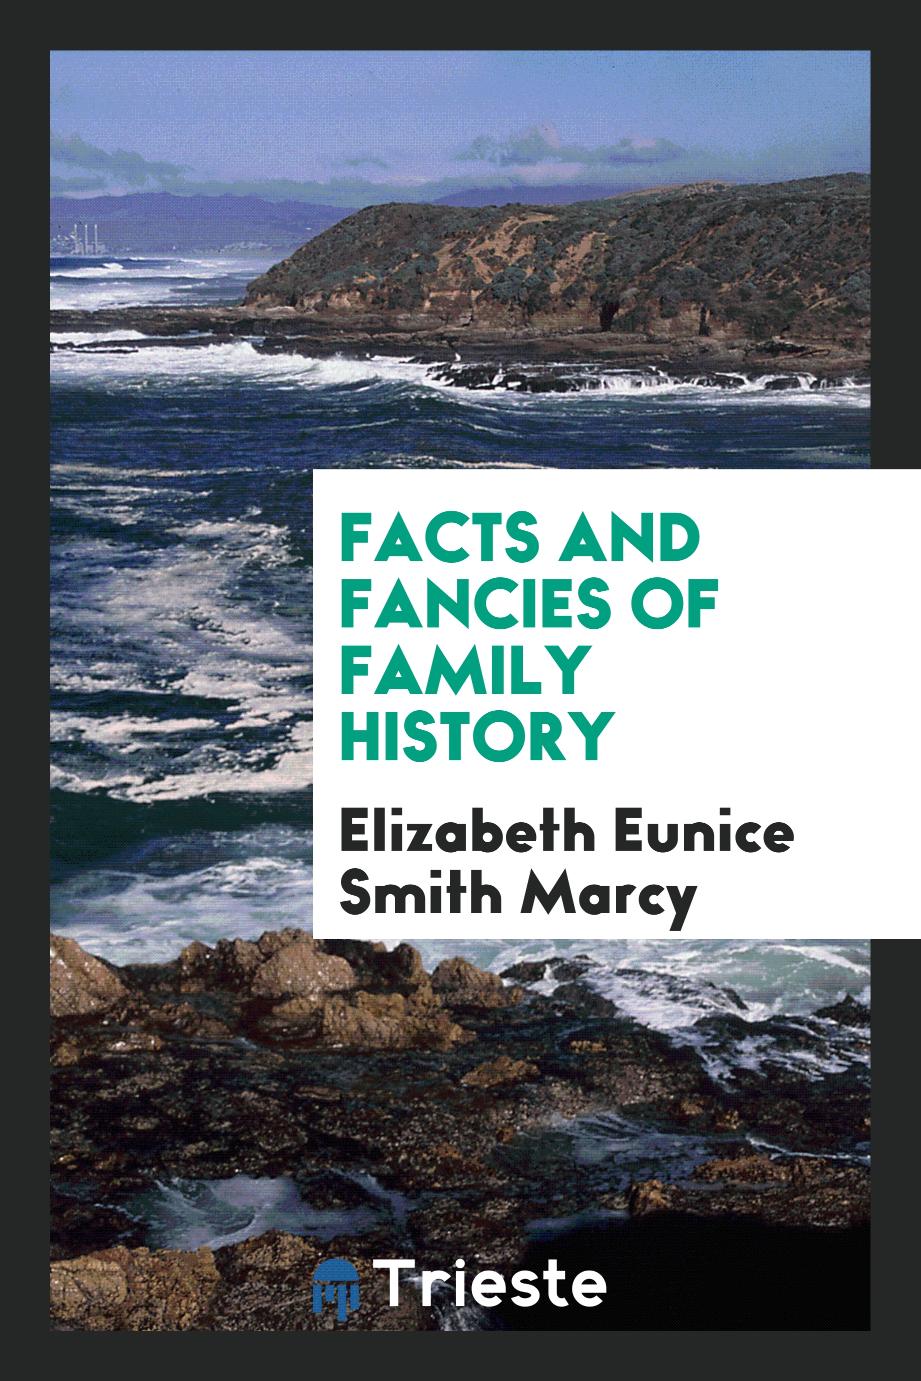 Facts and fancies of family history